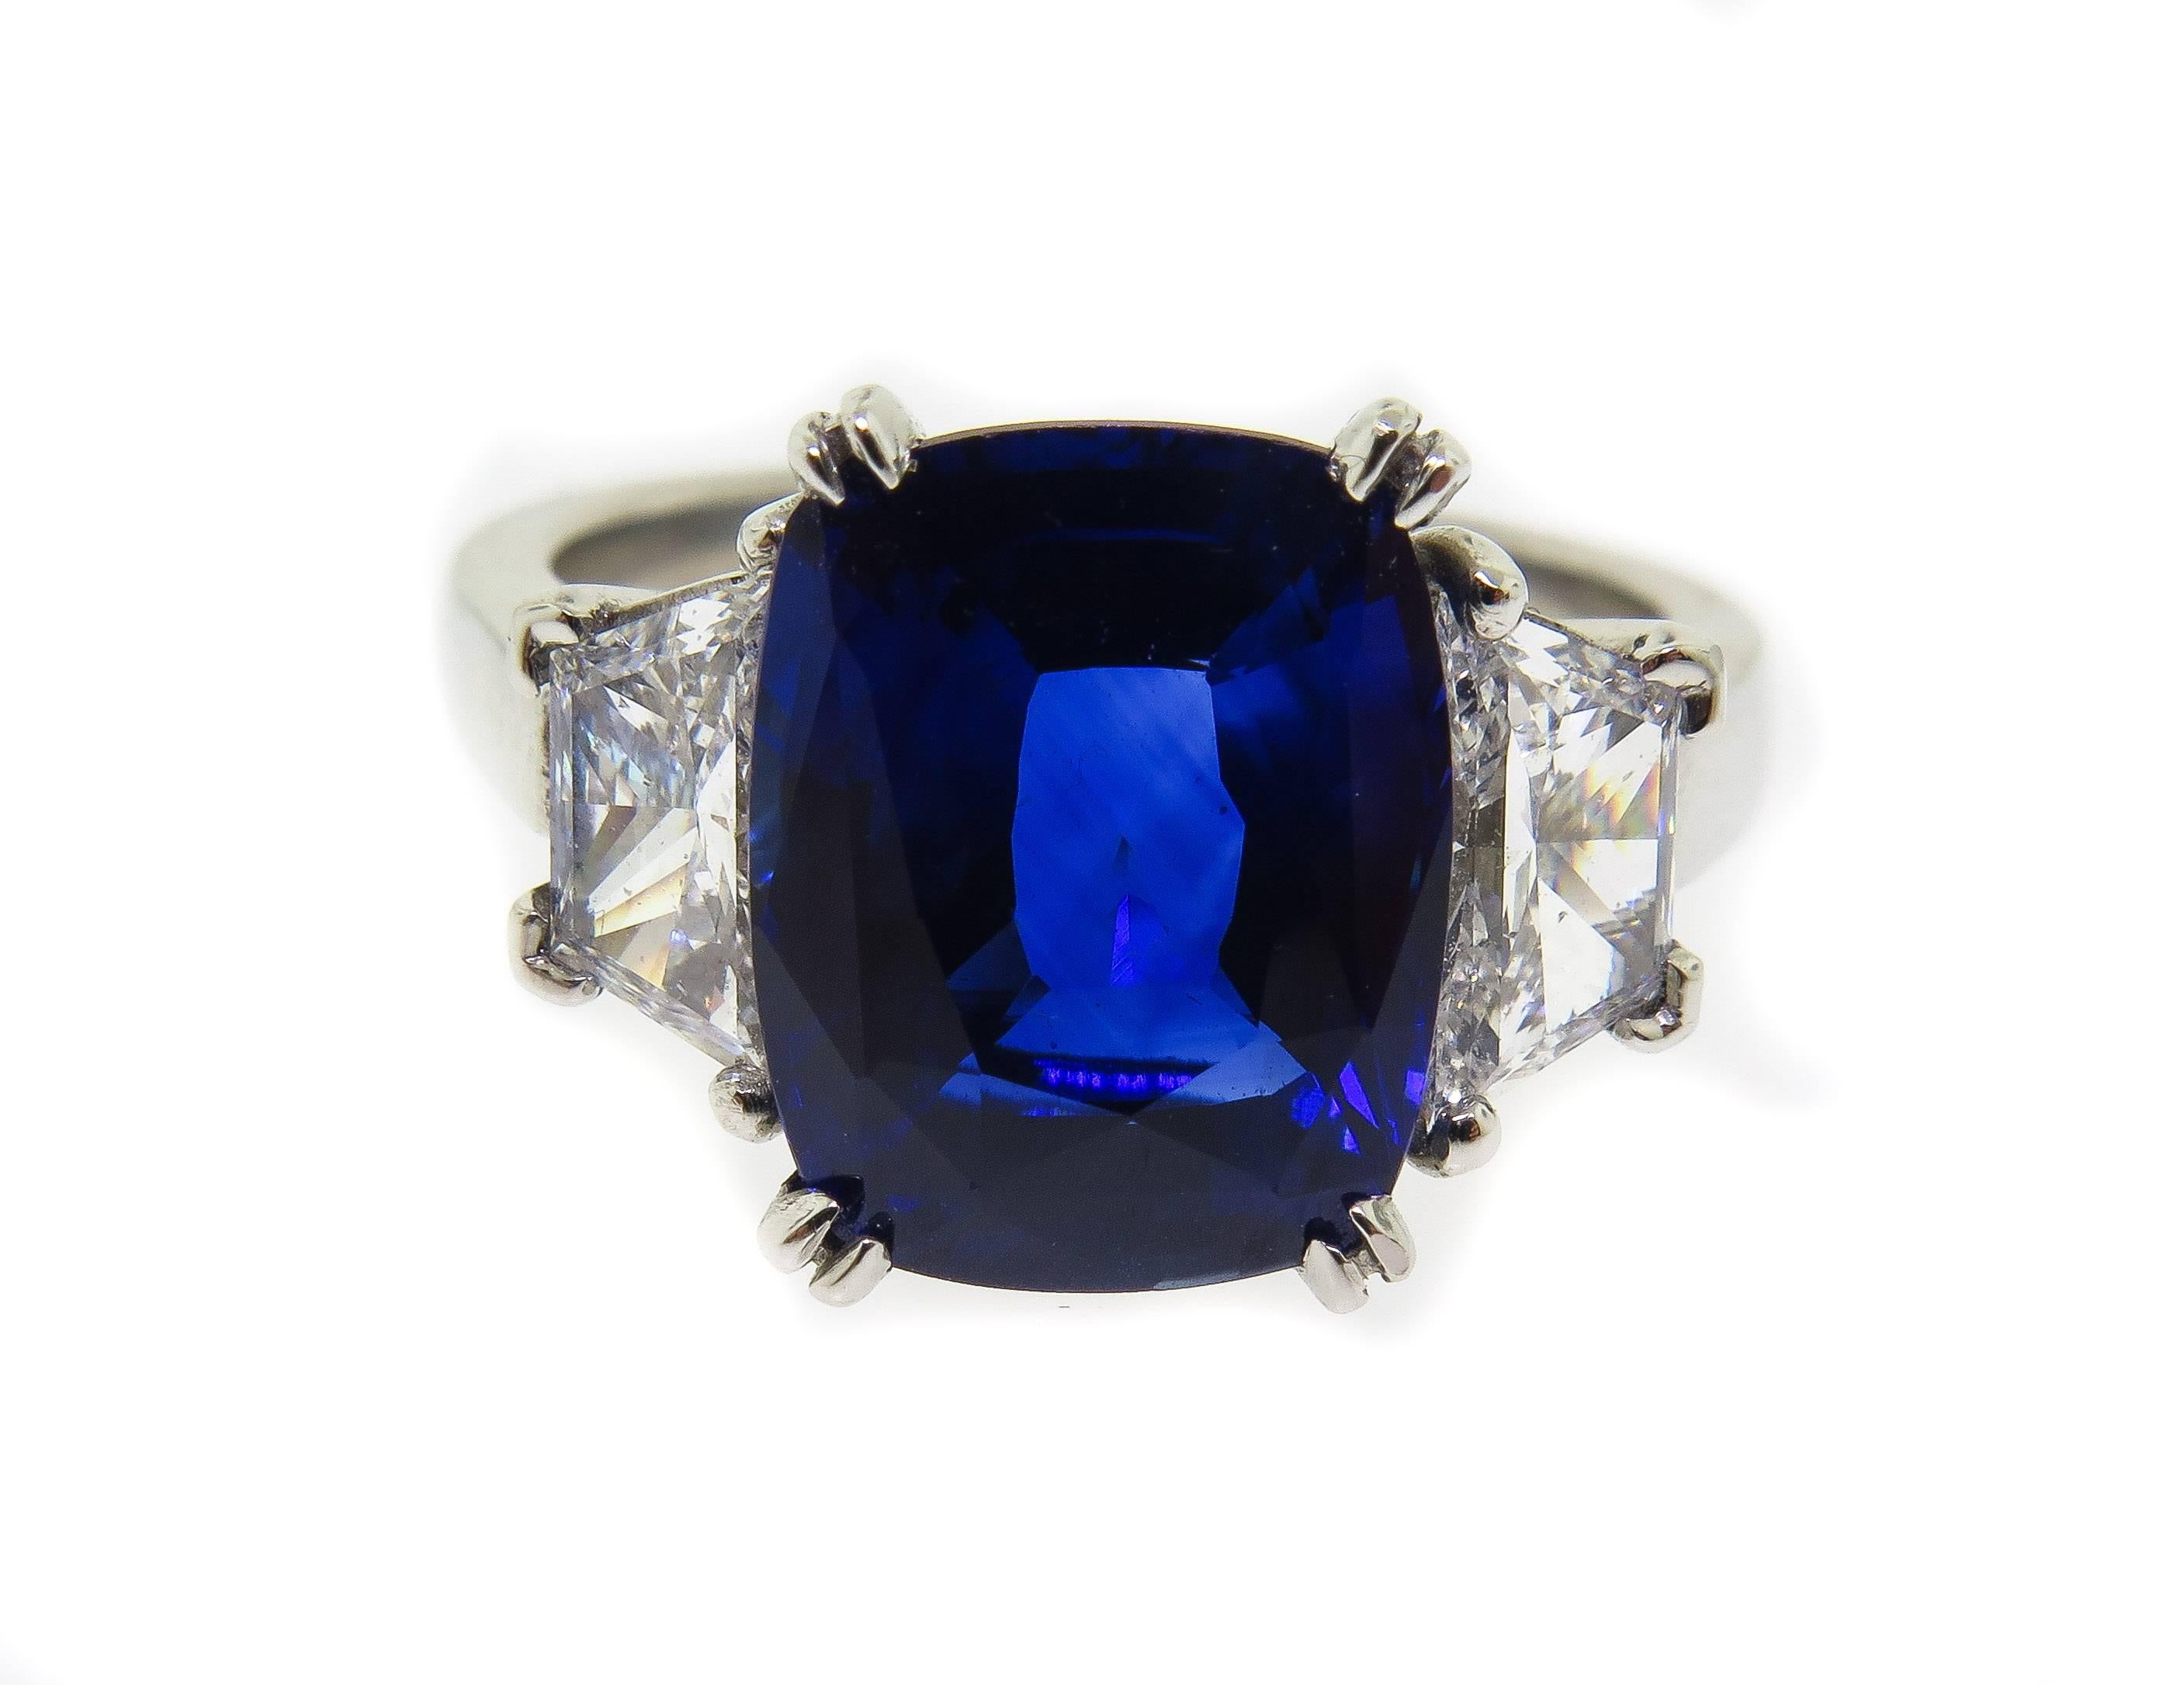 Stunning Sapphire and Diamond Ring with a beautiful cushion cut blue sapphire. The sapphire weighs 4.98 carats. The trapezoid diamonds on either side weigh 0.51 carats each totaling 1.02 carats and have G color and VS clarity. The ring is set in